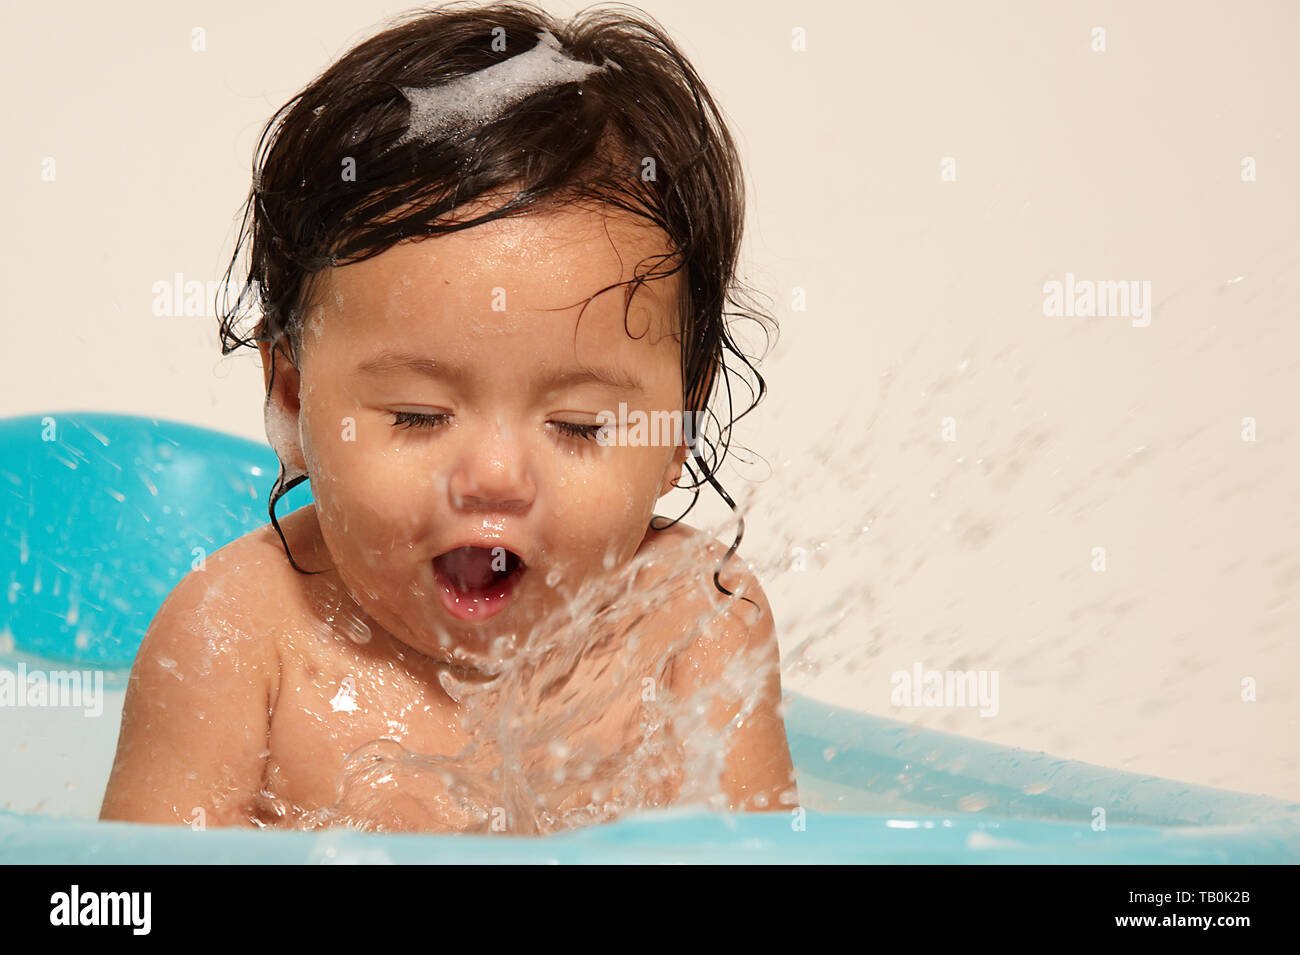 Super adorable cute baby girl happy and excited splashing in a ...